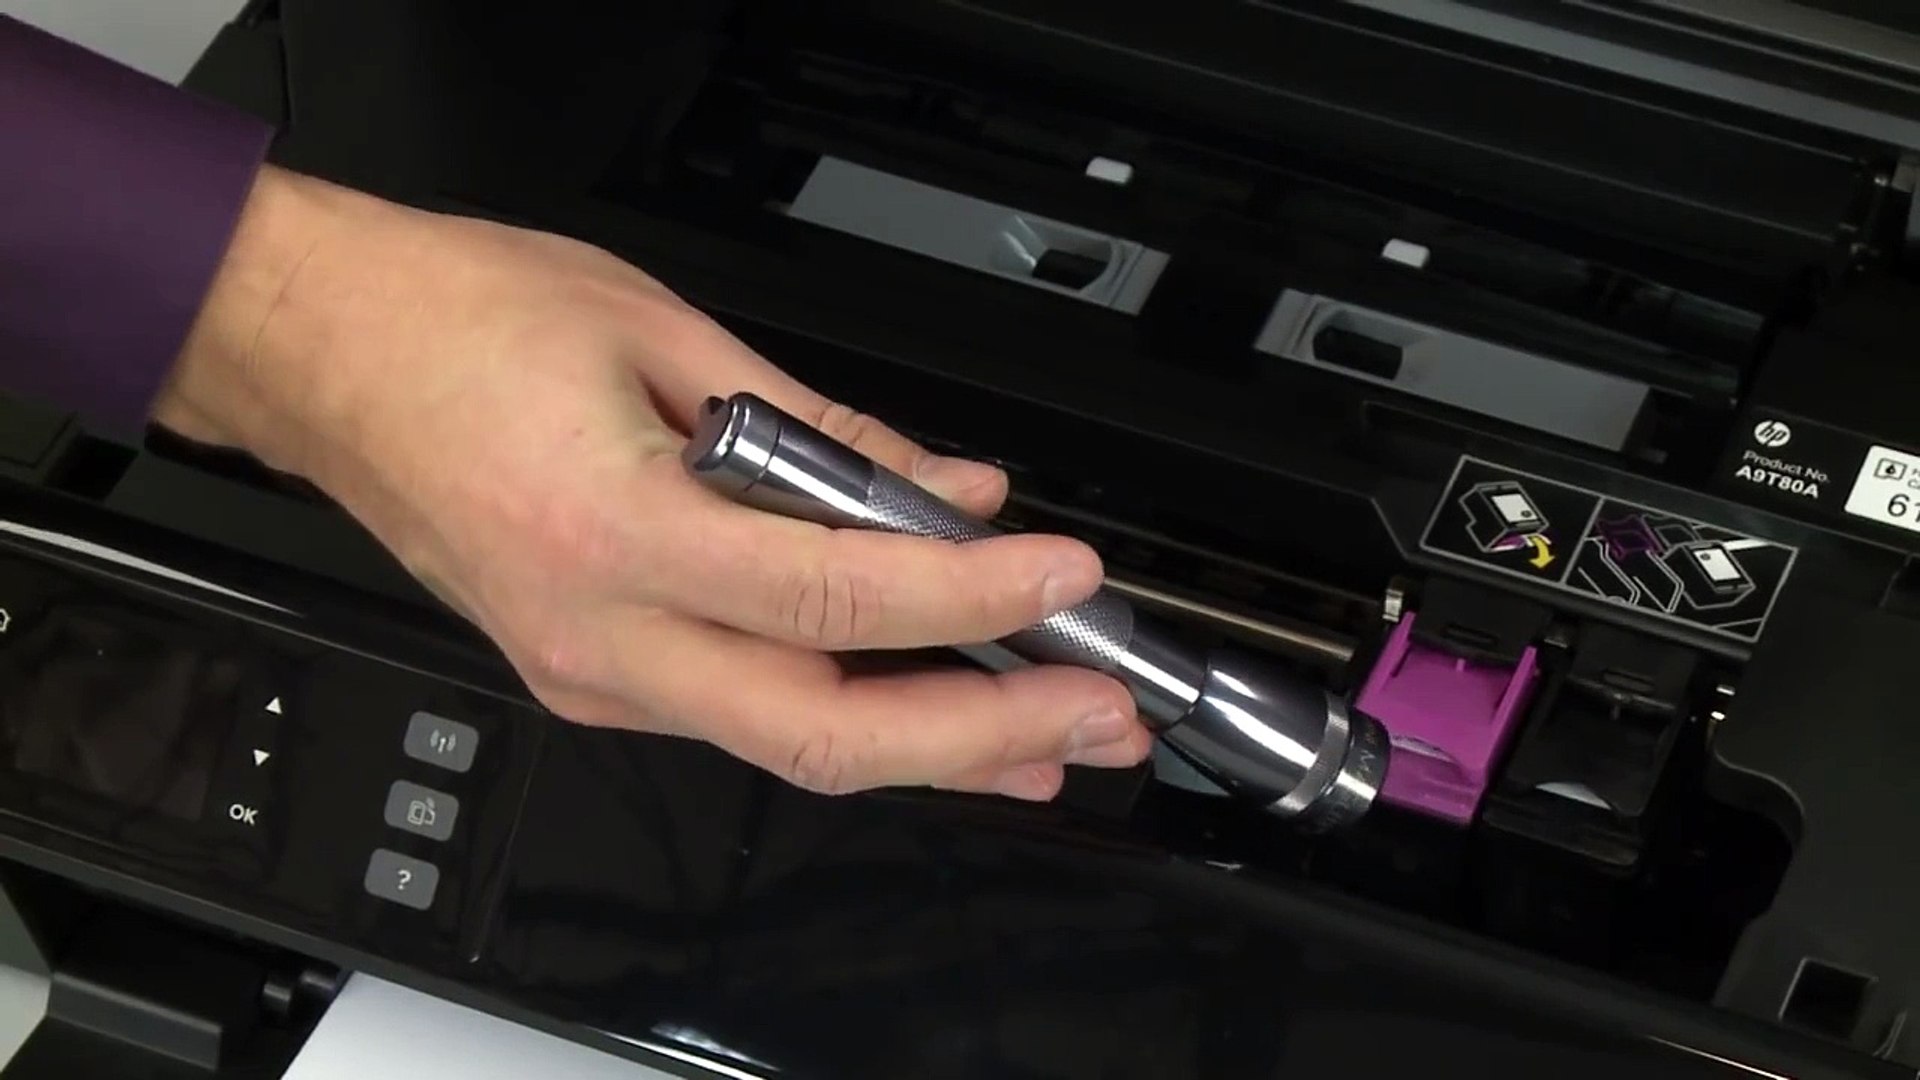 Fixing a Carriage Jam - HP Envy 4500 e-All-in-One Printer